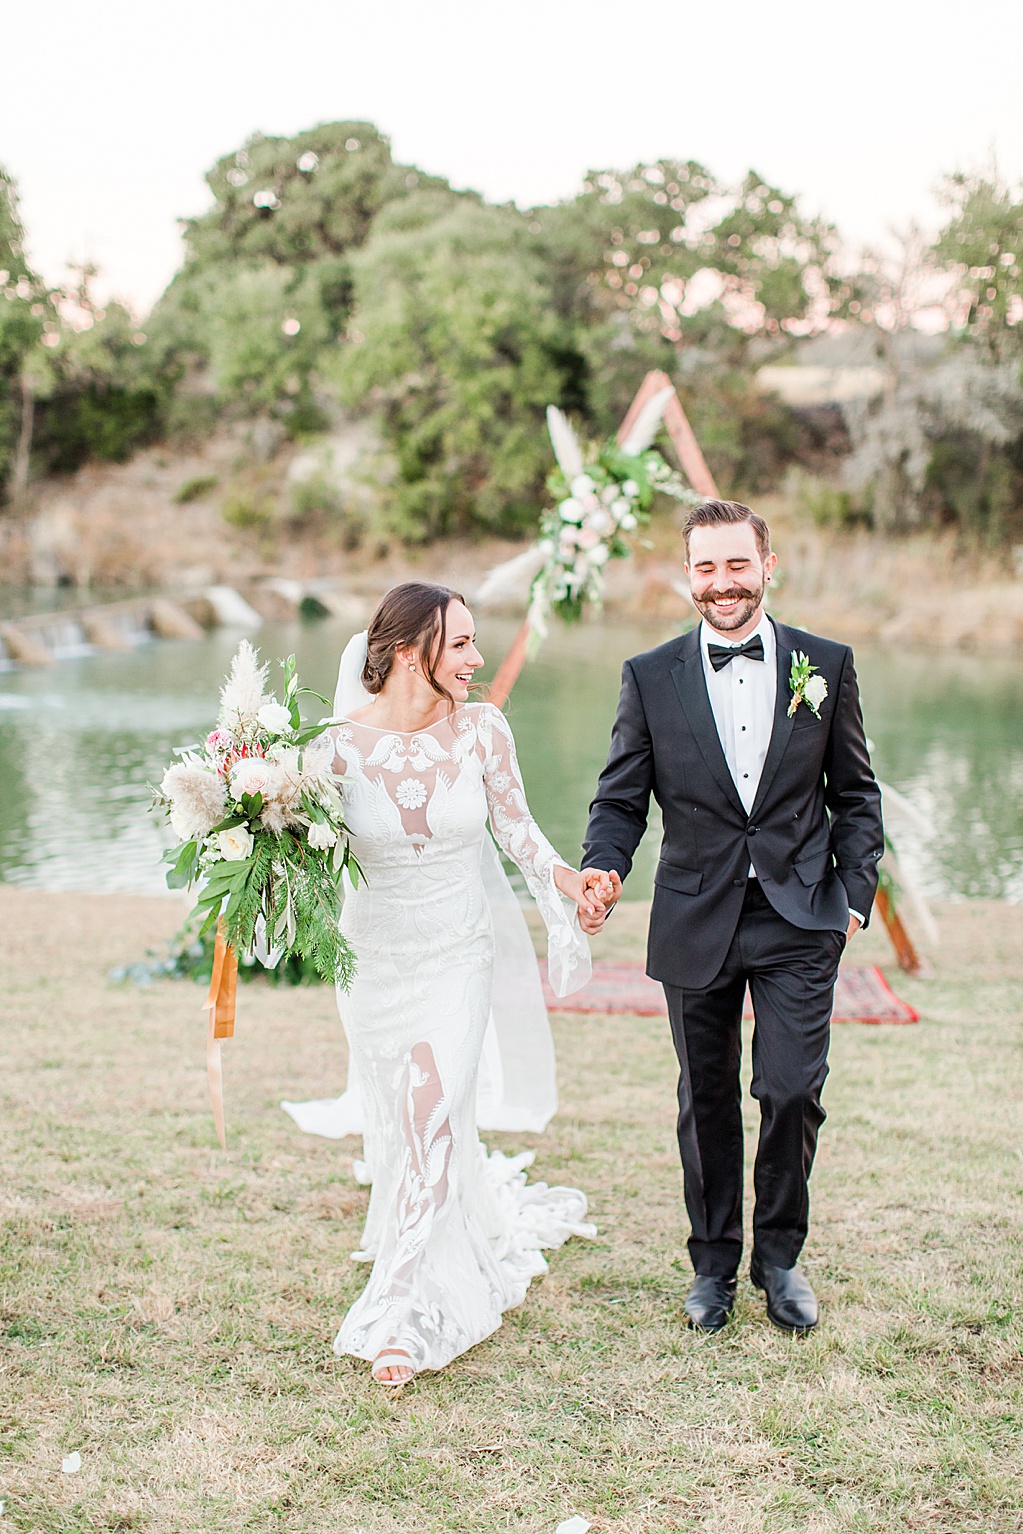 Hill Country Wedding at Turtle Creek Olive Grove wedding venue in Kerrville Texas by Wedding Photographer Allison Jeffers 0112